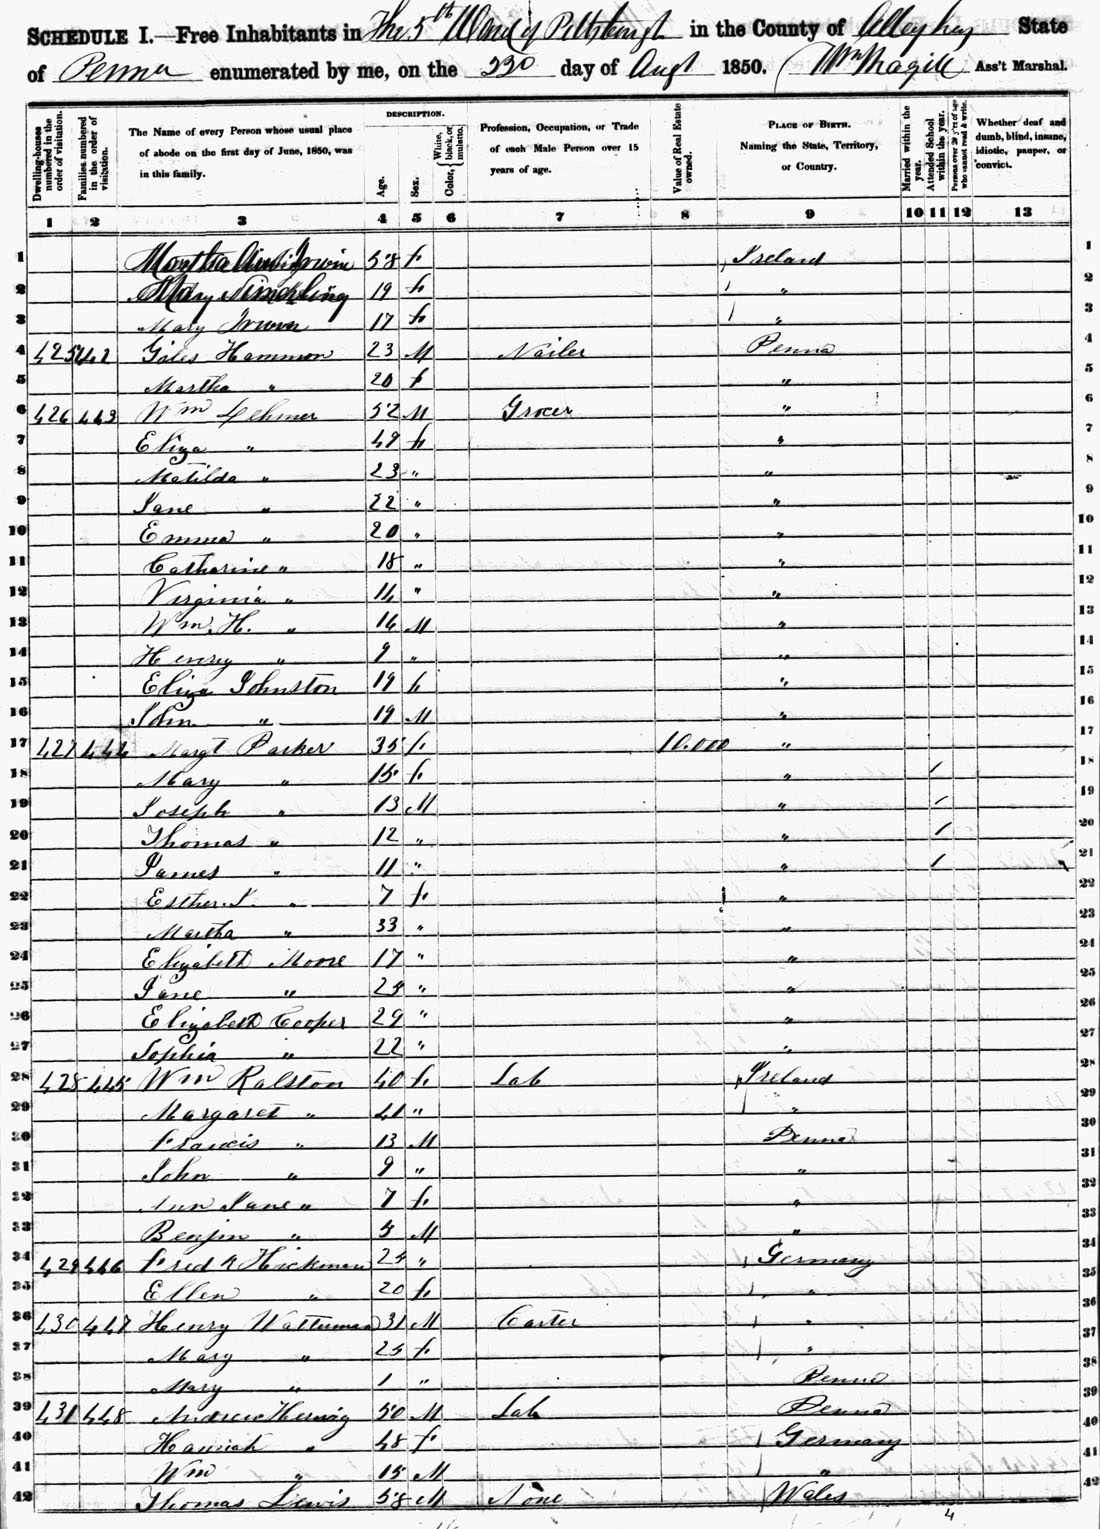 Thomas and Margaret Williams Lewis Family in the 1850 Census
